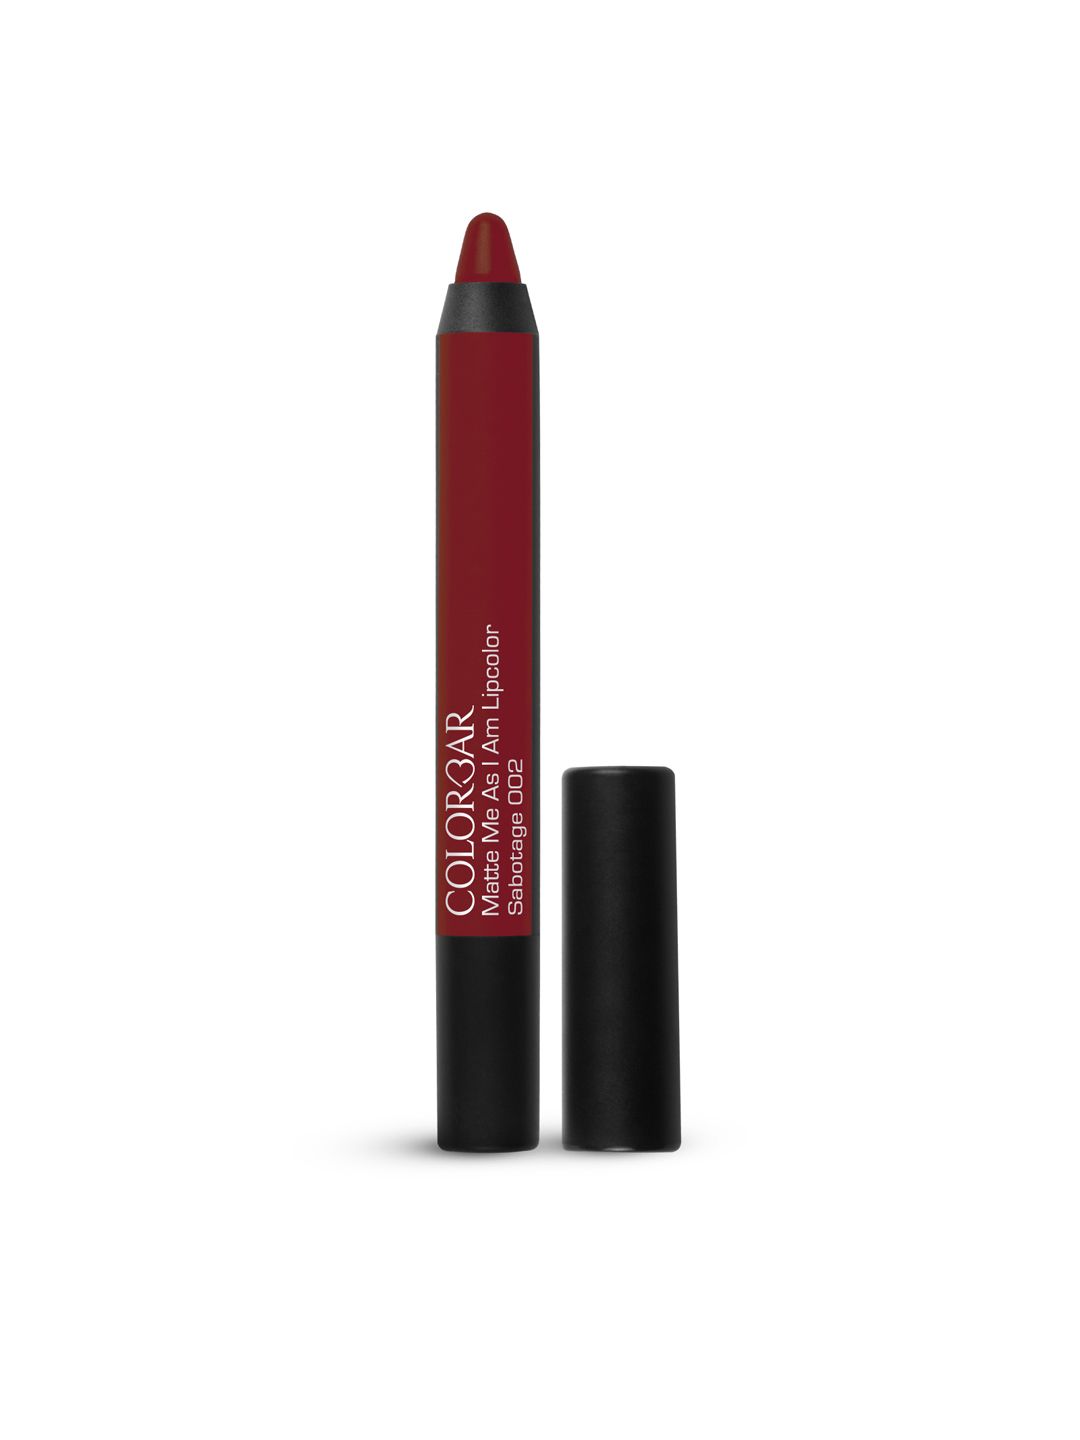 Colorbar Matte Me As I Am Lipcolor - Sabotage 002 Price in India